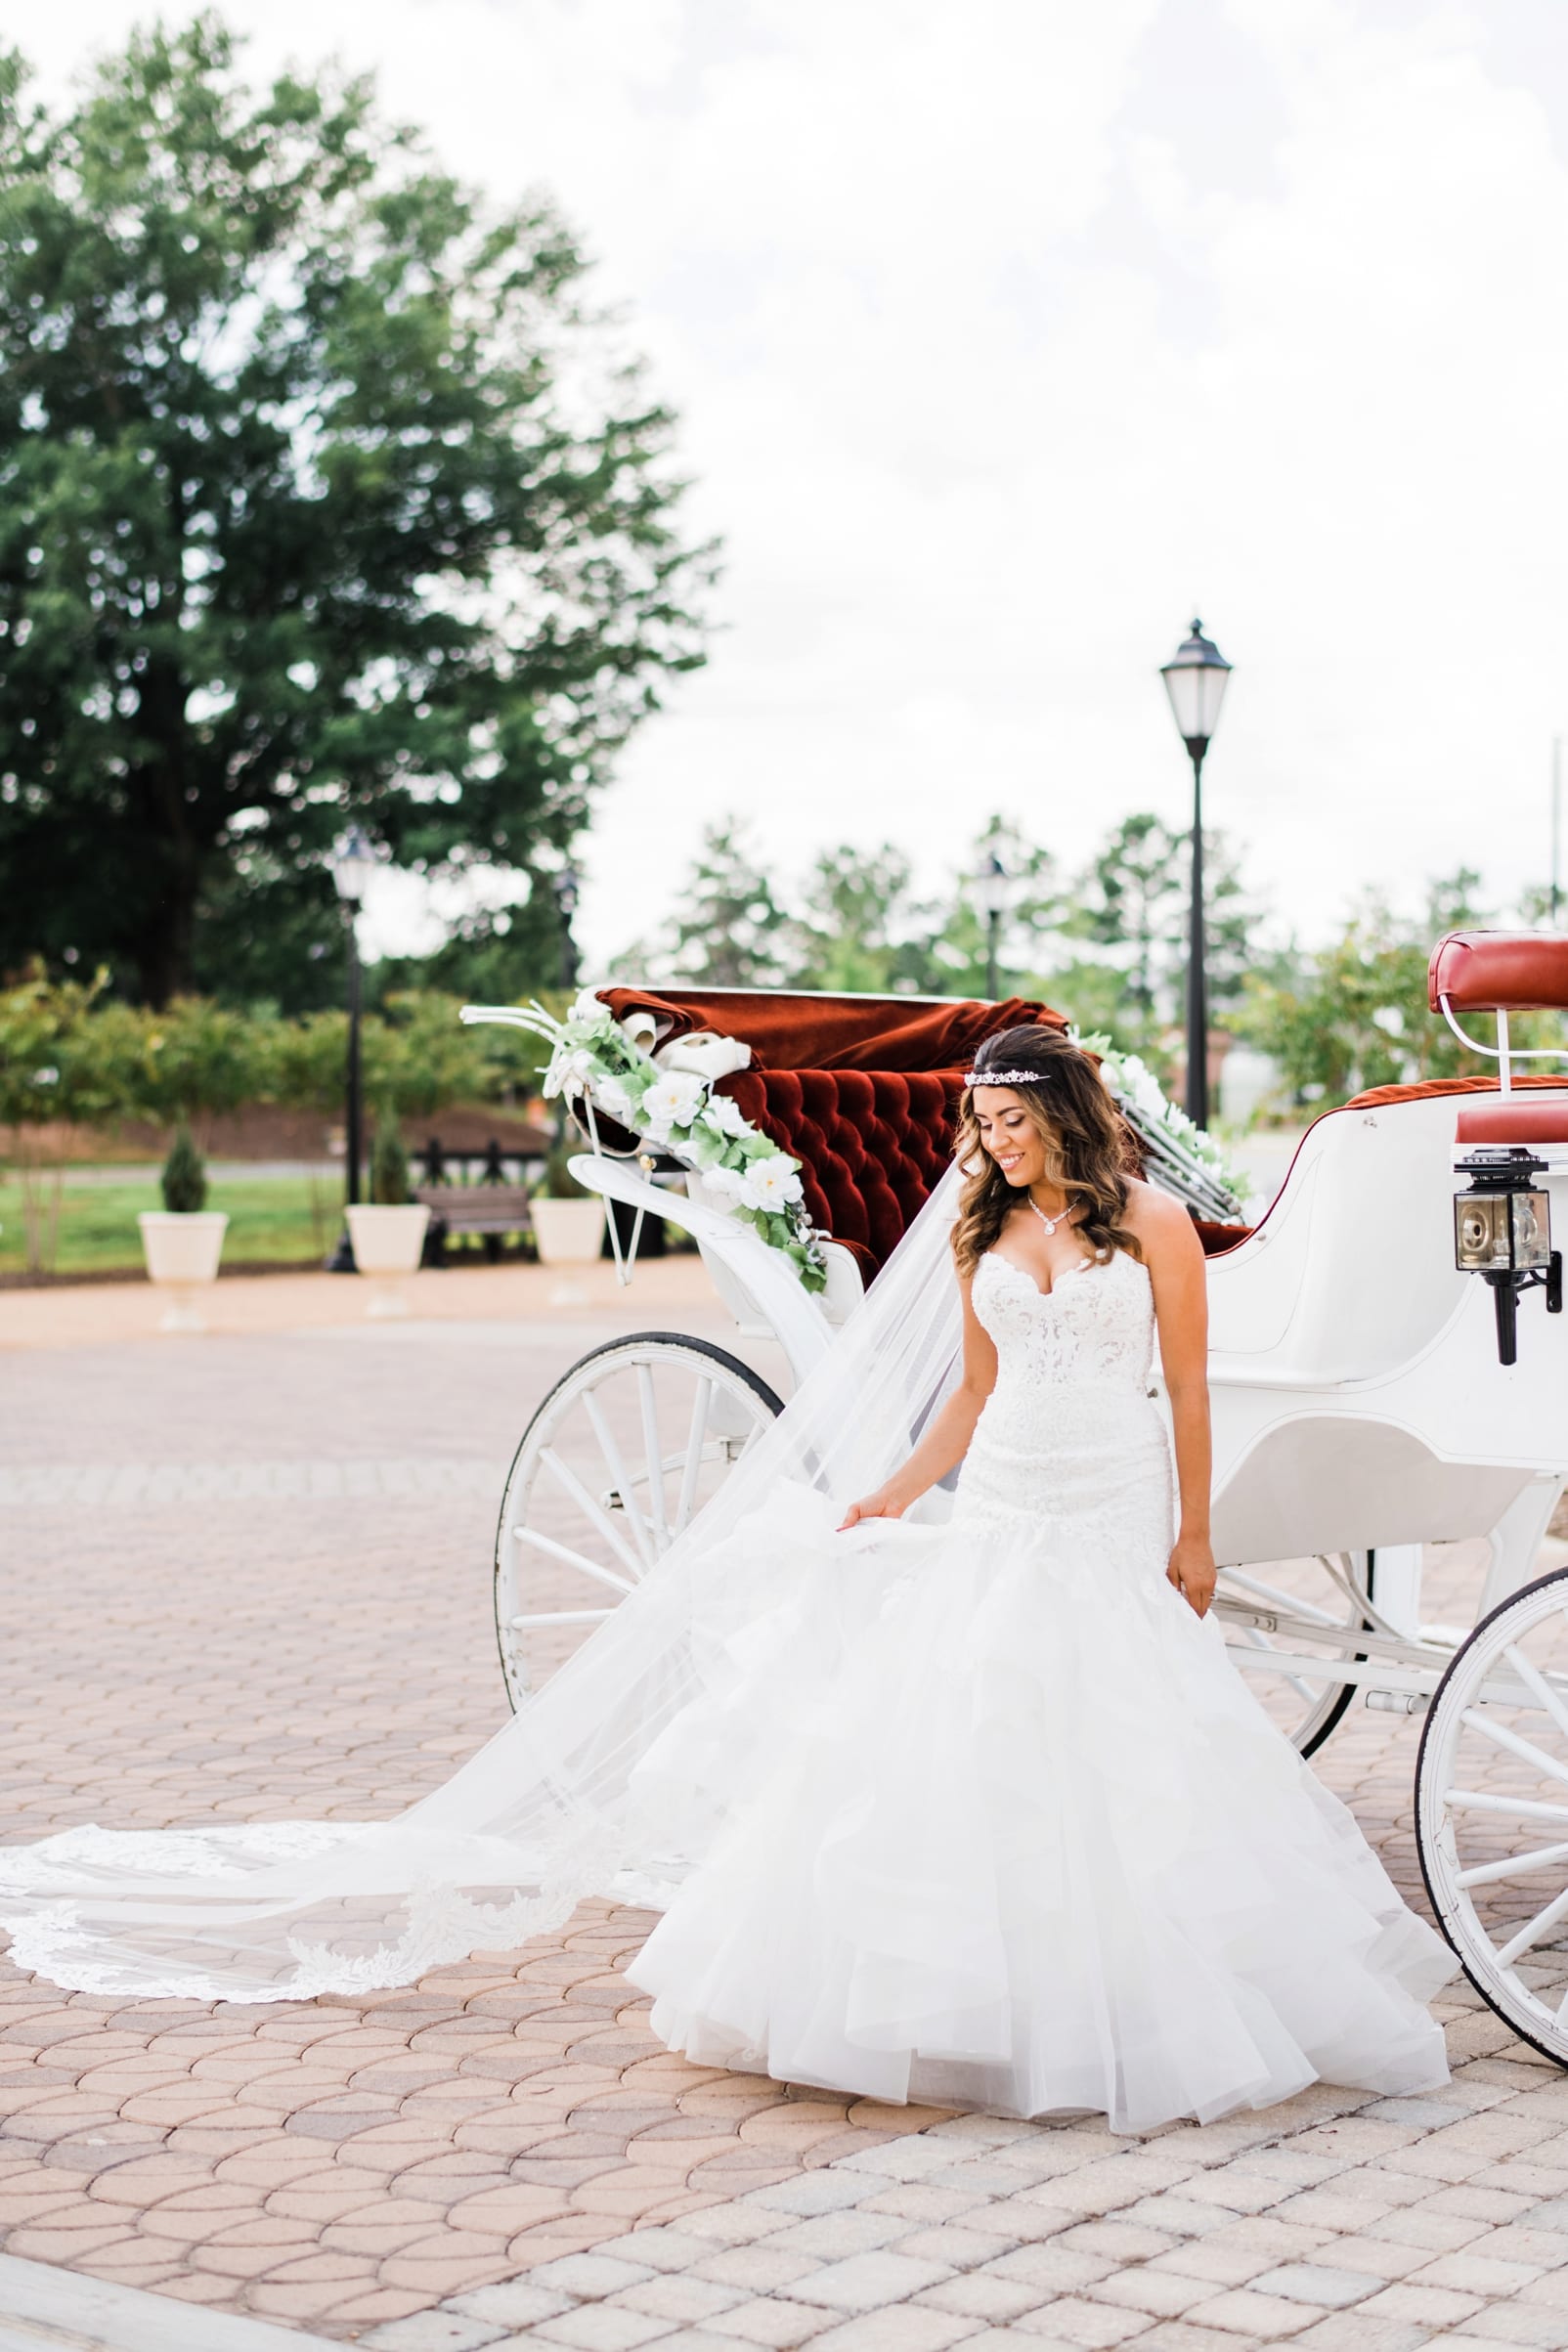 Raleigh, NC bride in strapless gown with a long veil standing in front of a horse and carriage photo